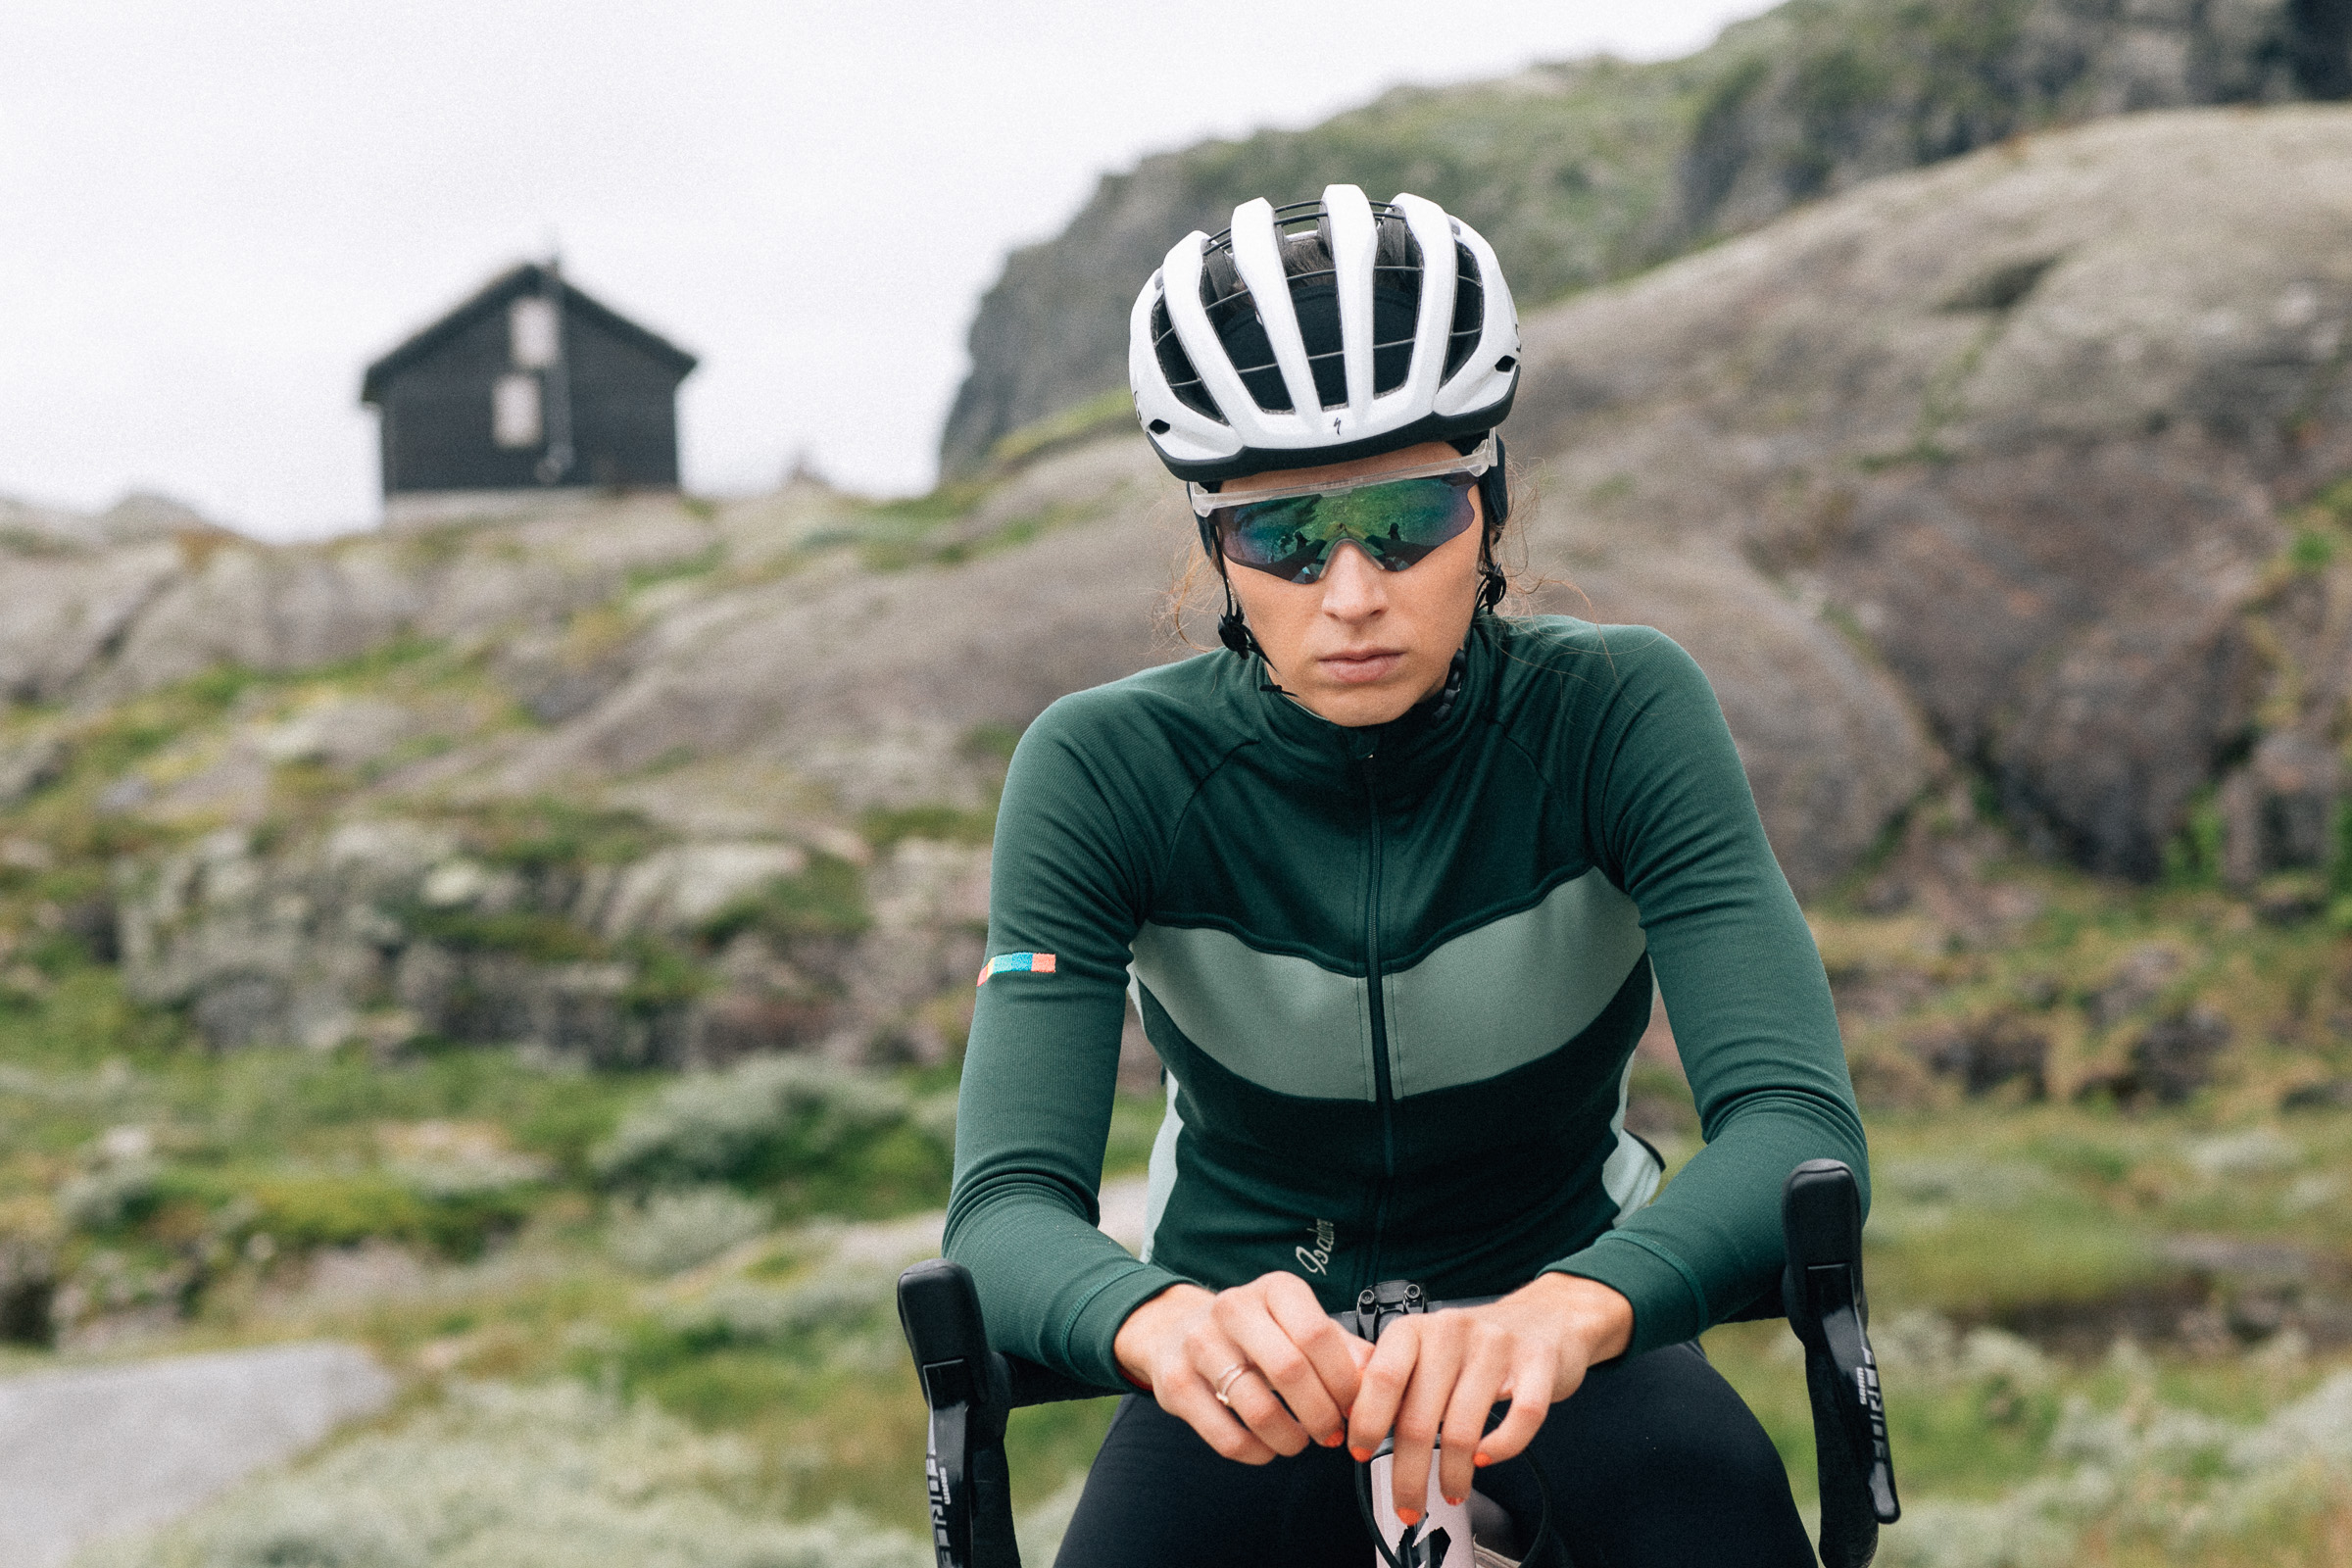 Women's Signature Thermal Adventure Long Sleeve Jersey Nordic